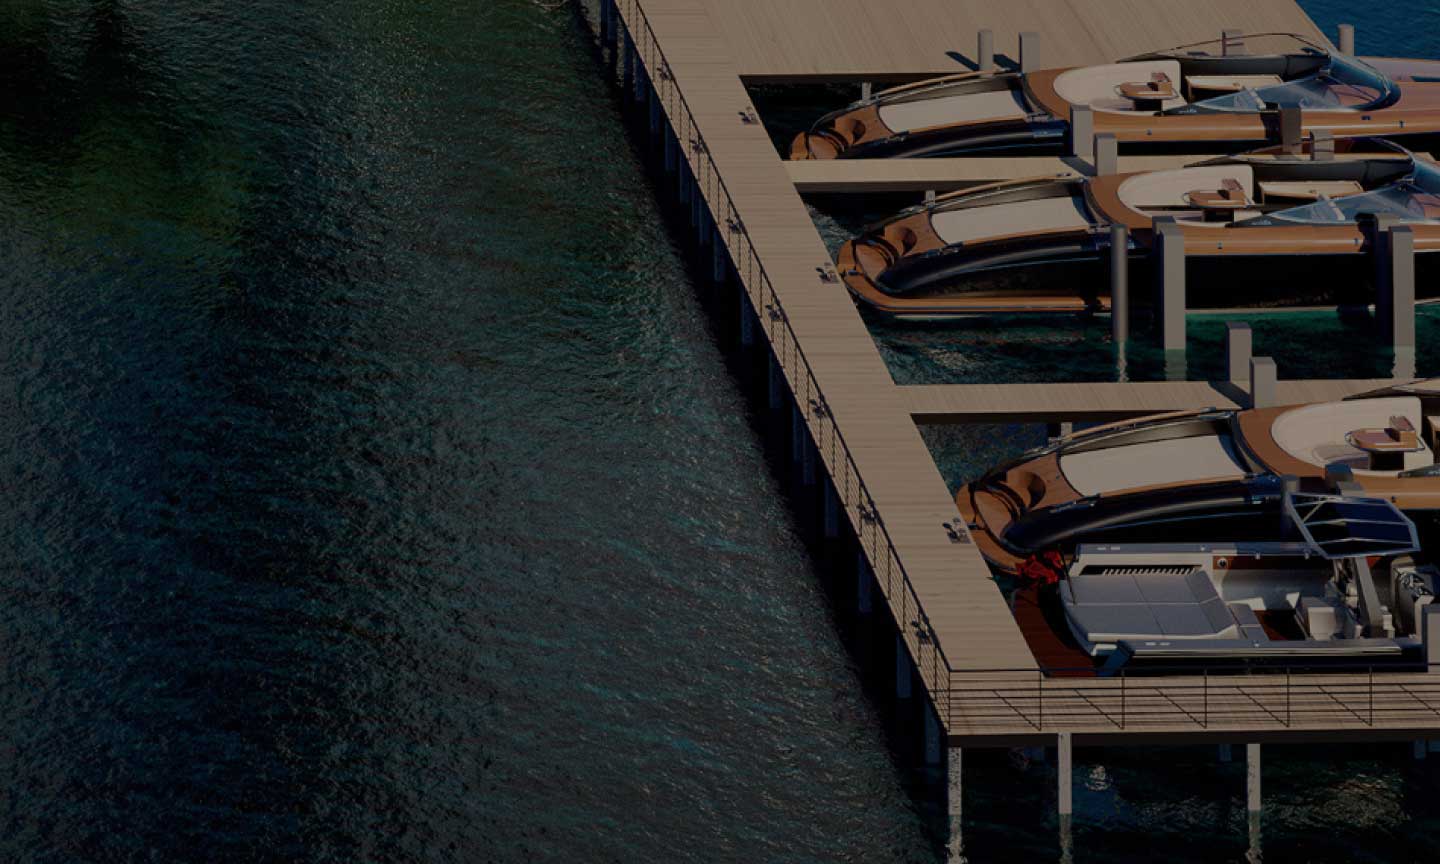 luxury yachts parked on a dock